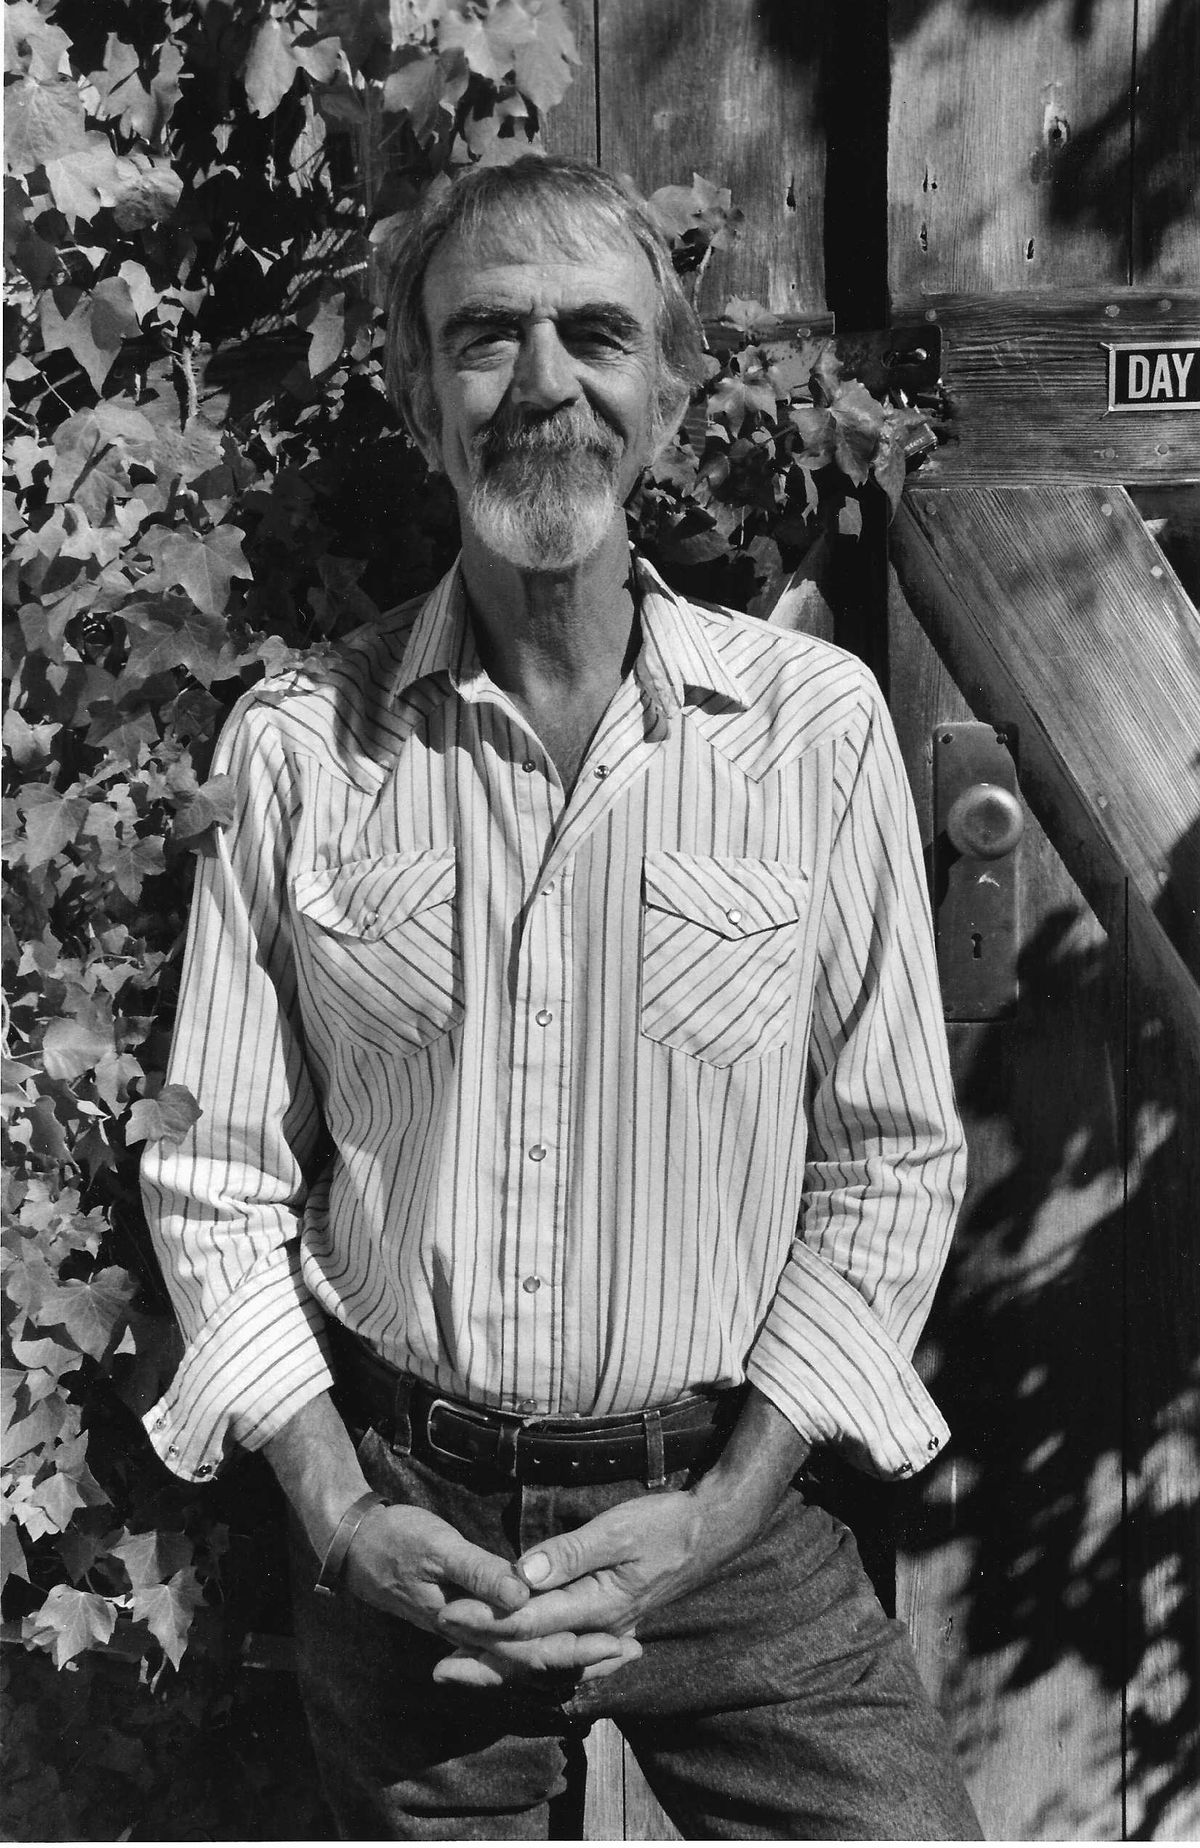 The artist William T. Wiley in 1997 Jack Fulton